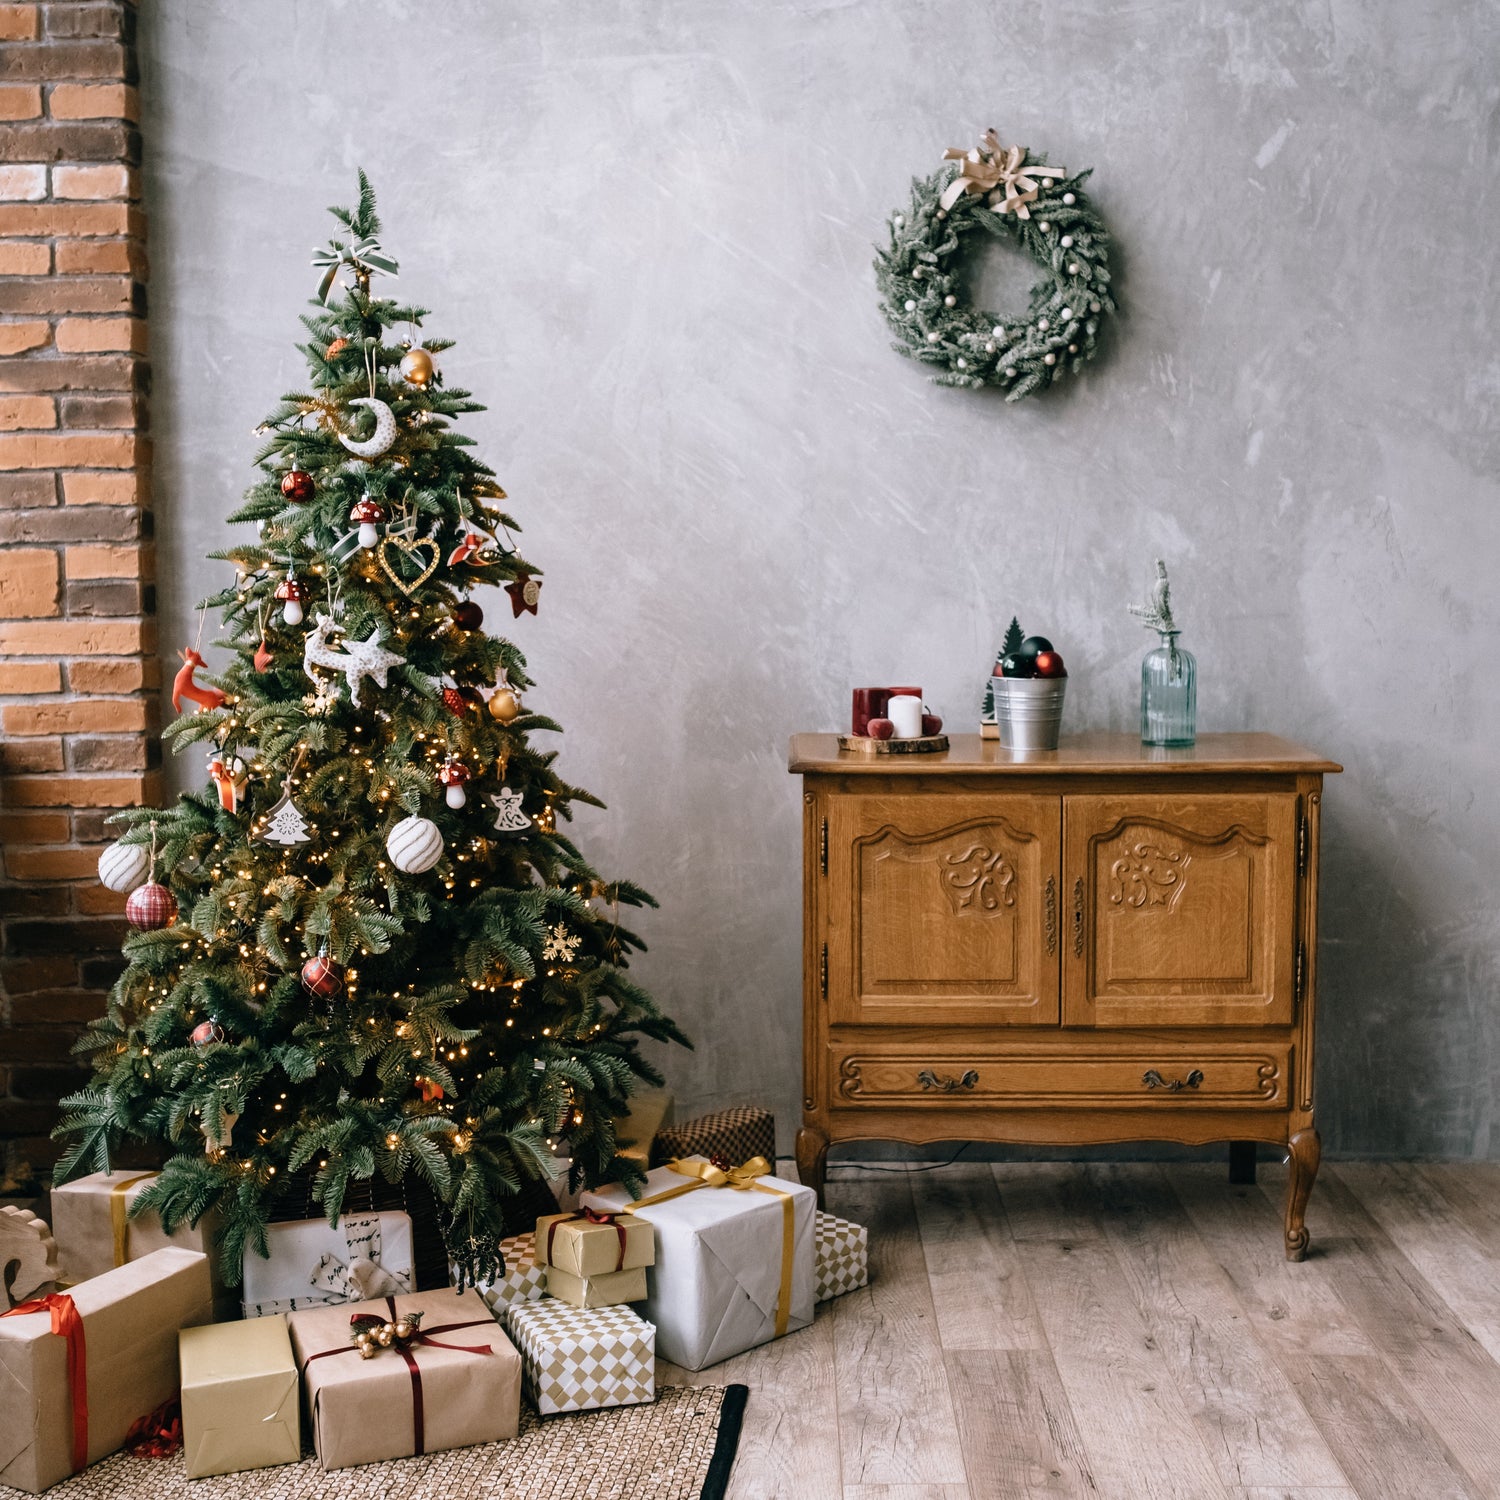 7 Ways to Celebrate the True Meaning of Christmas with Your Family